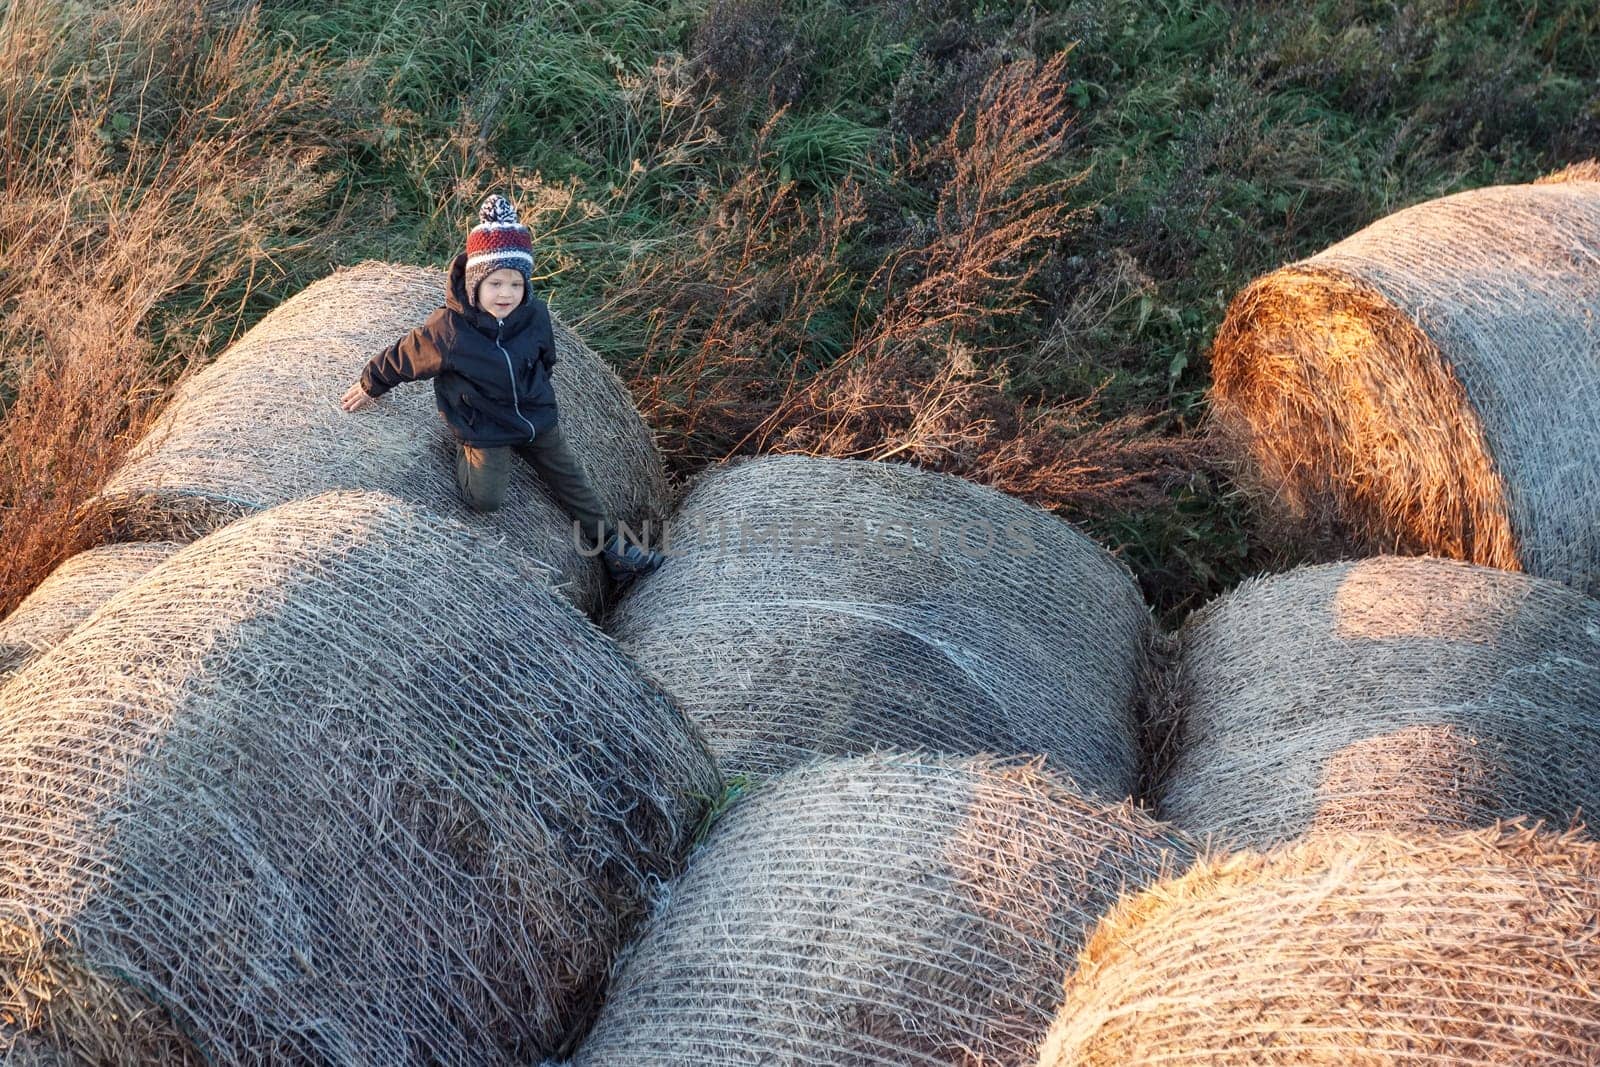 A little cute boy with a warm autumn hat among large rolls of straw in the evening sunlight, photo taken from above by Lincikas